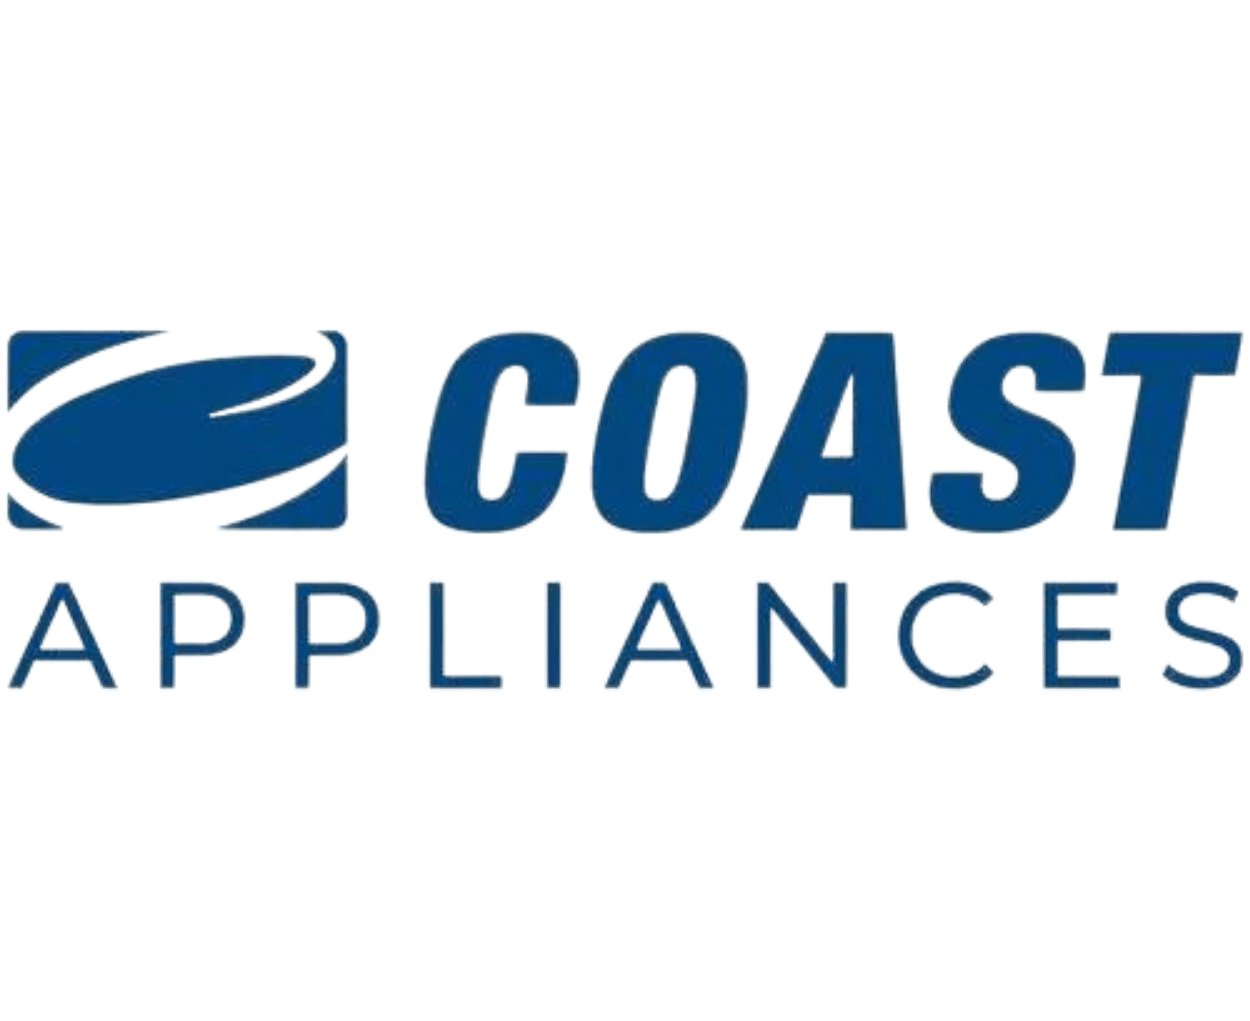 The image shows a logo for "coast appliances," featuring stylized text and a graphic element representing an appliance or coastal theme on the left side of the text. The color scheme is predominantly blue,